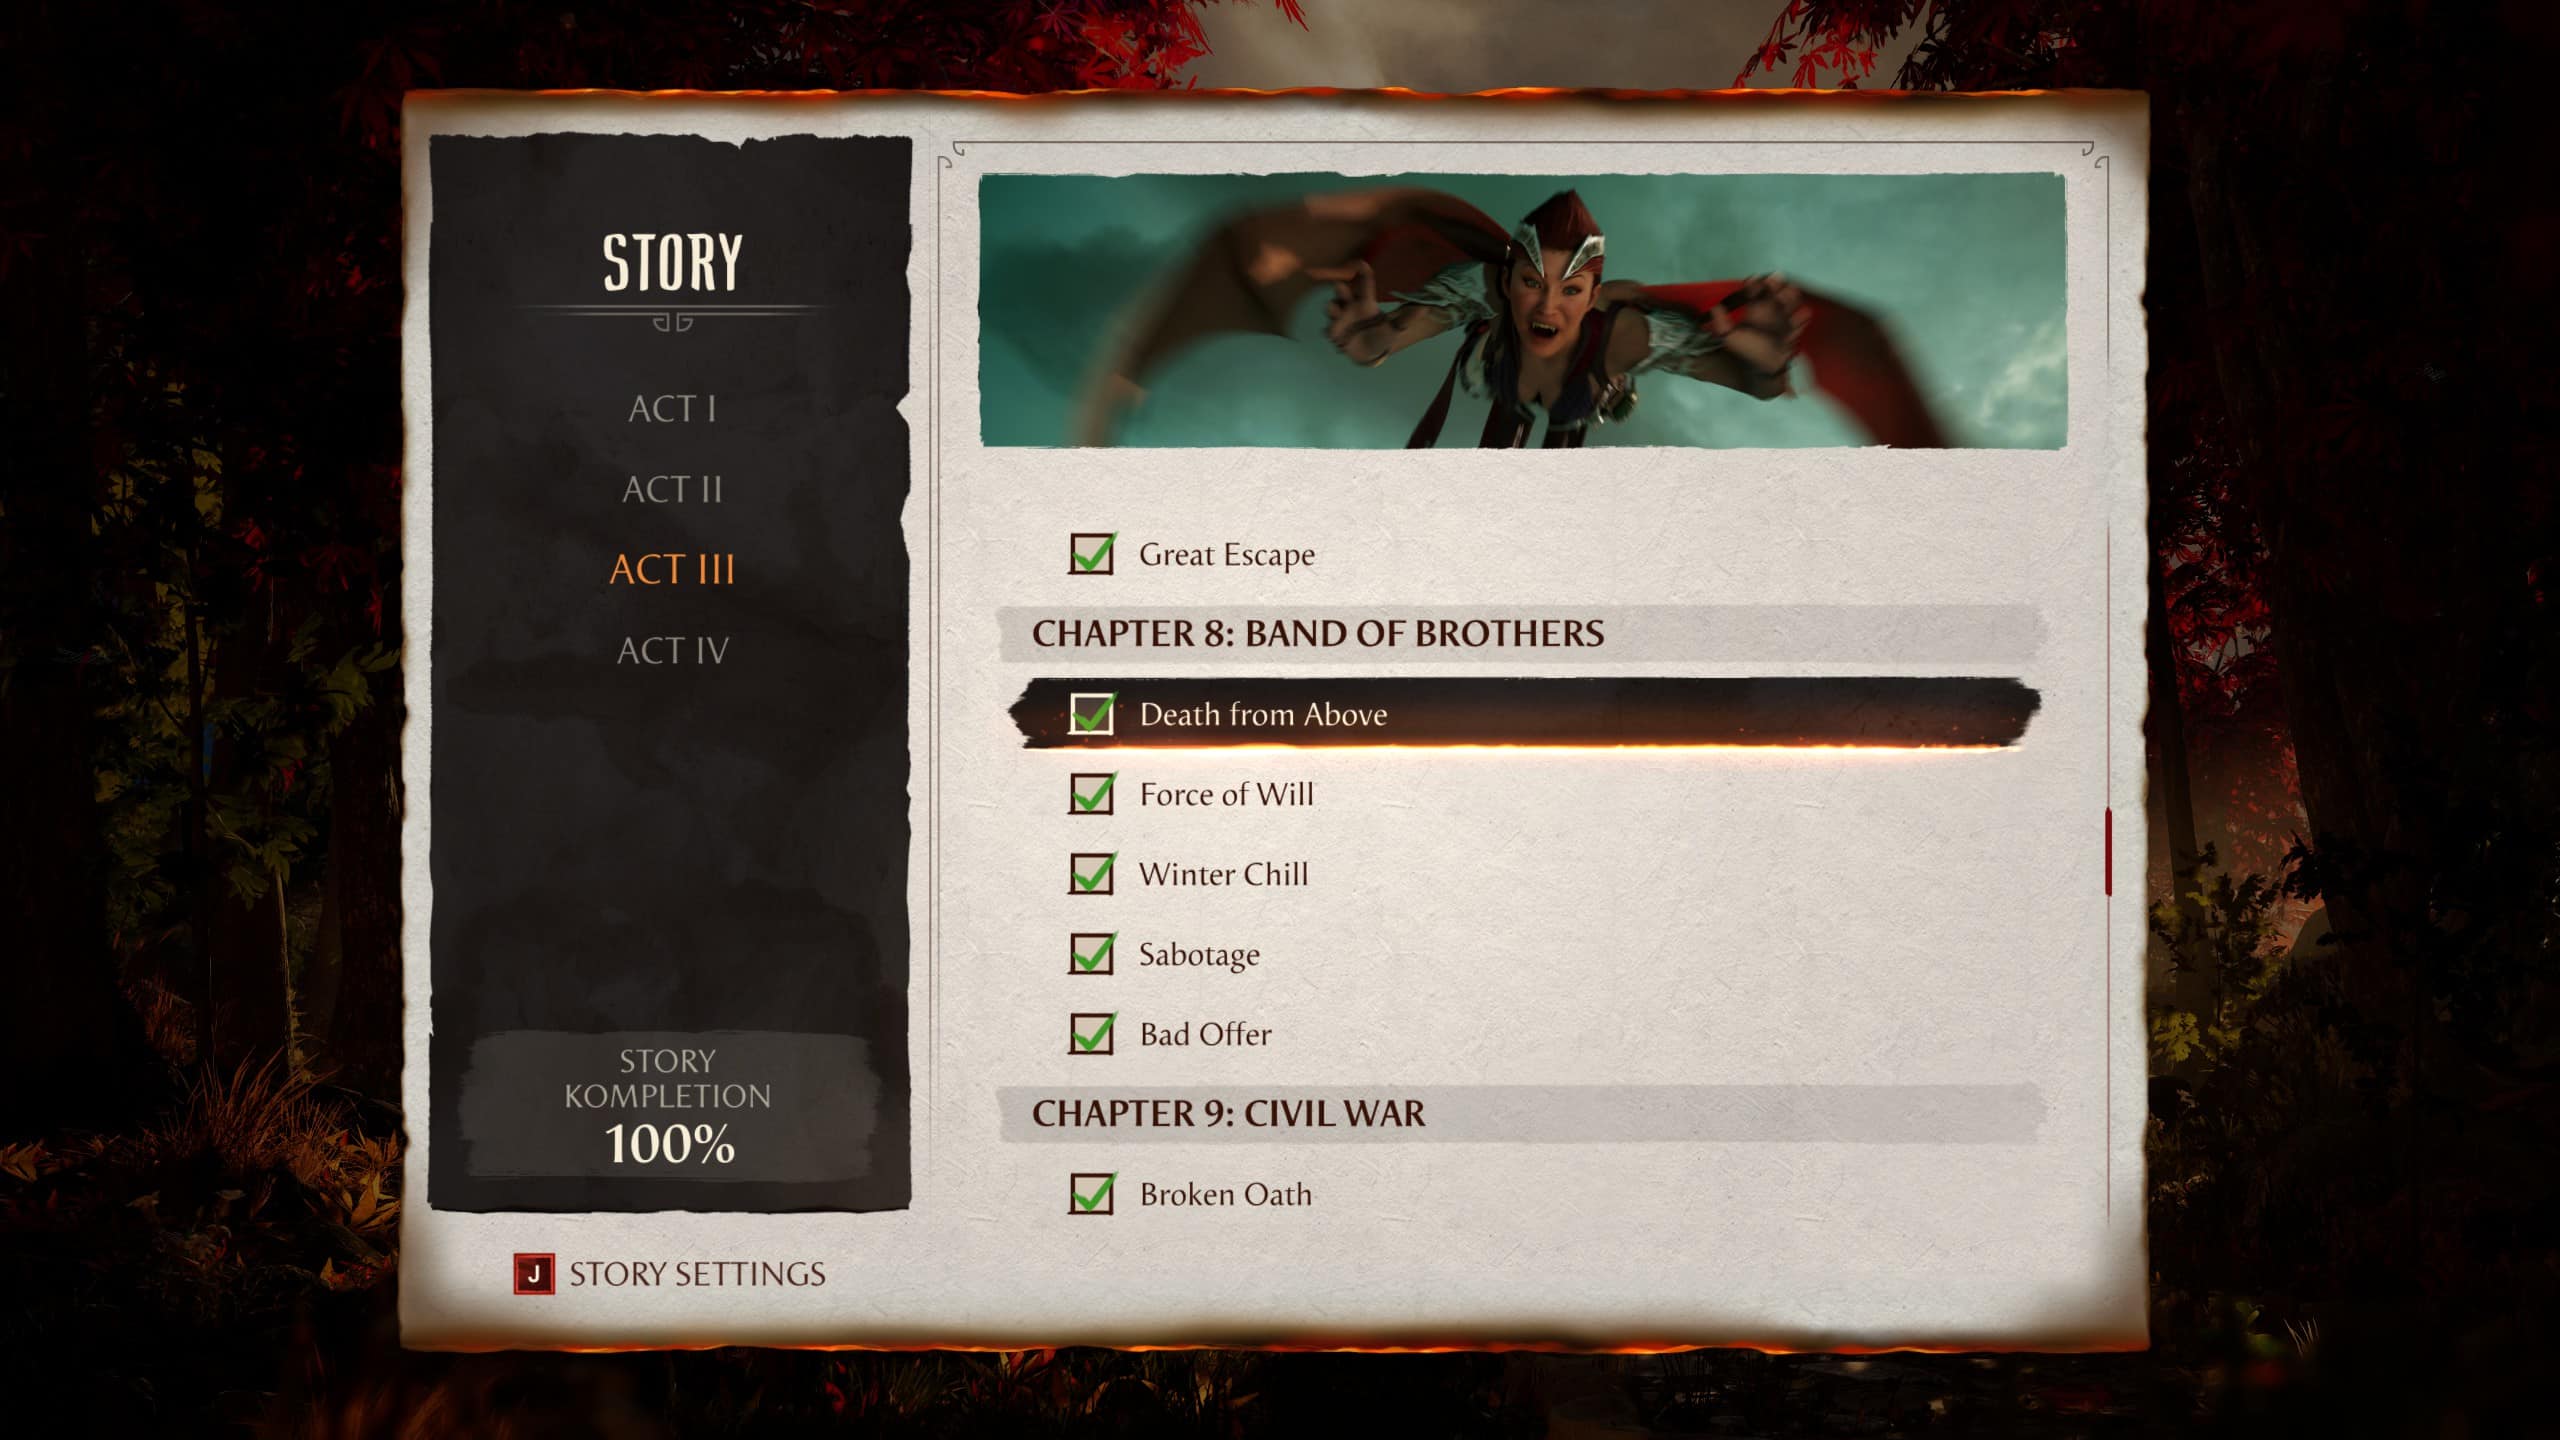 Mortal Kombat 1 chapters: An image of the in-game campaign menu with the third act highlighted.